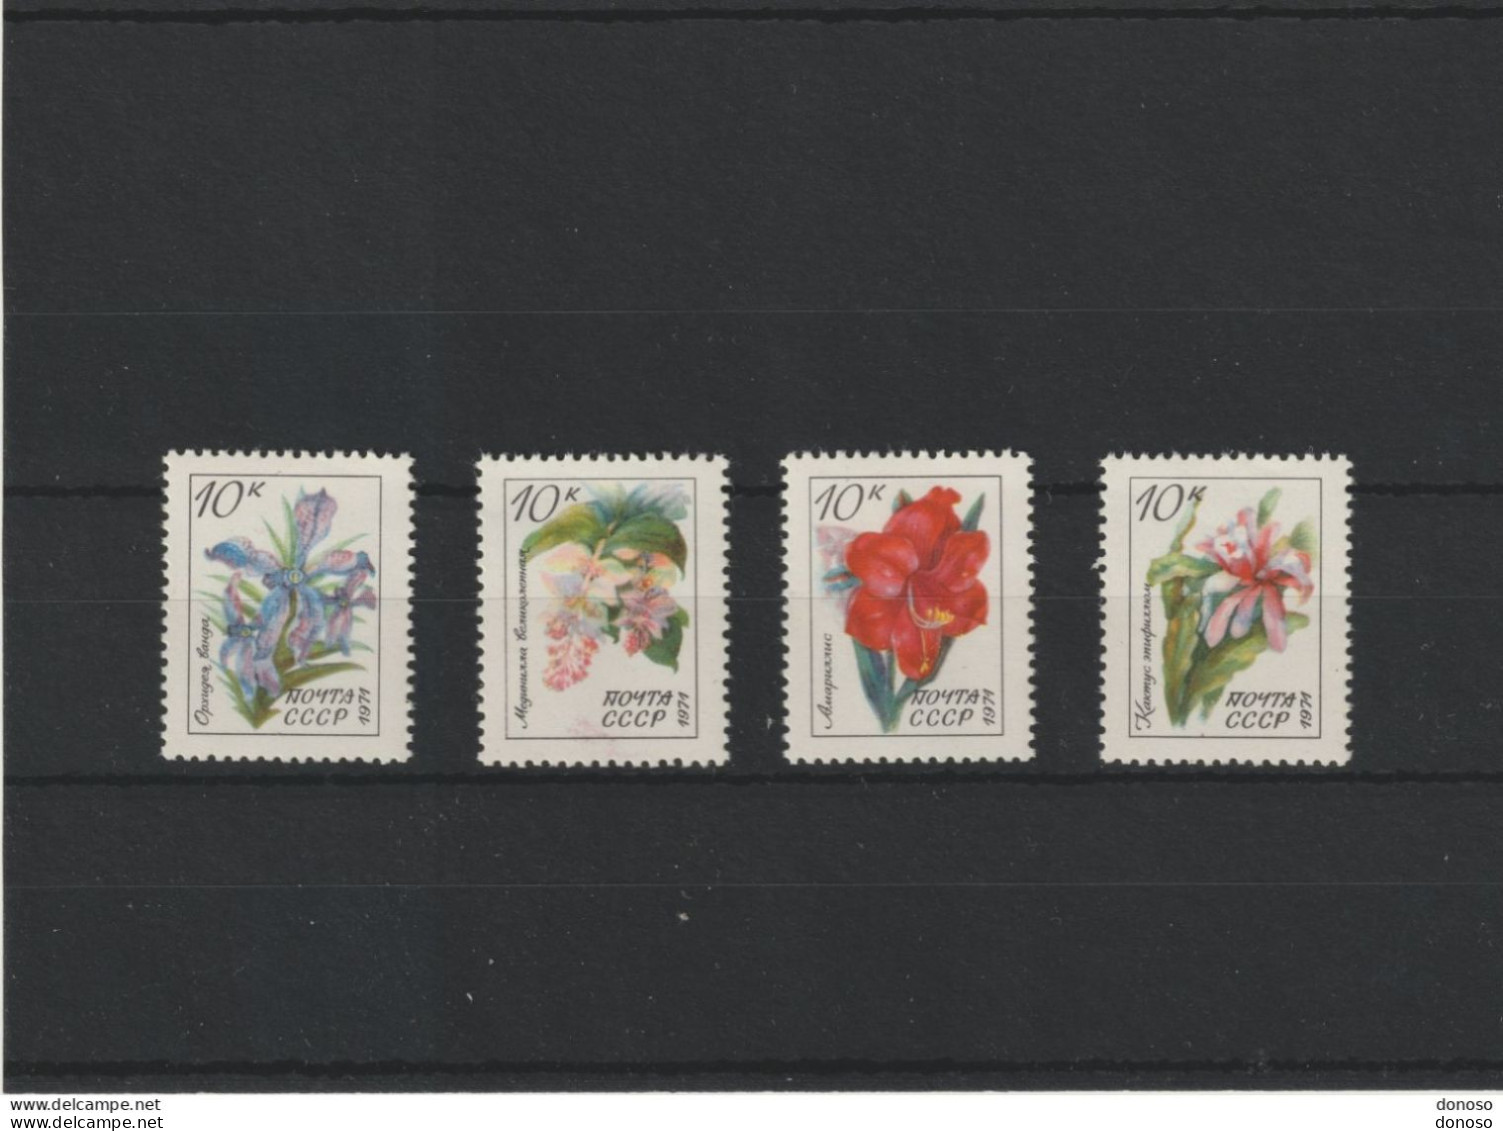 URSS 1971 FLEURS TROPICALES Michel 3968-3971 NEUF** MNH - Unused Stamps